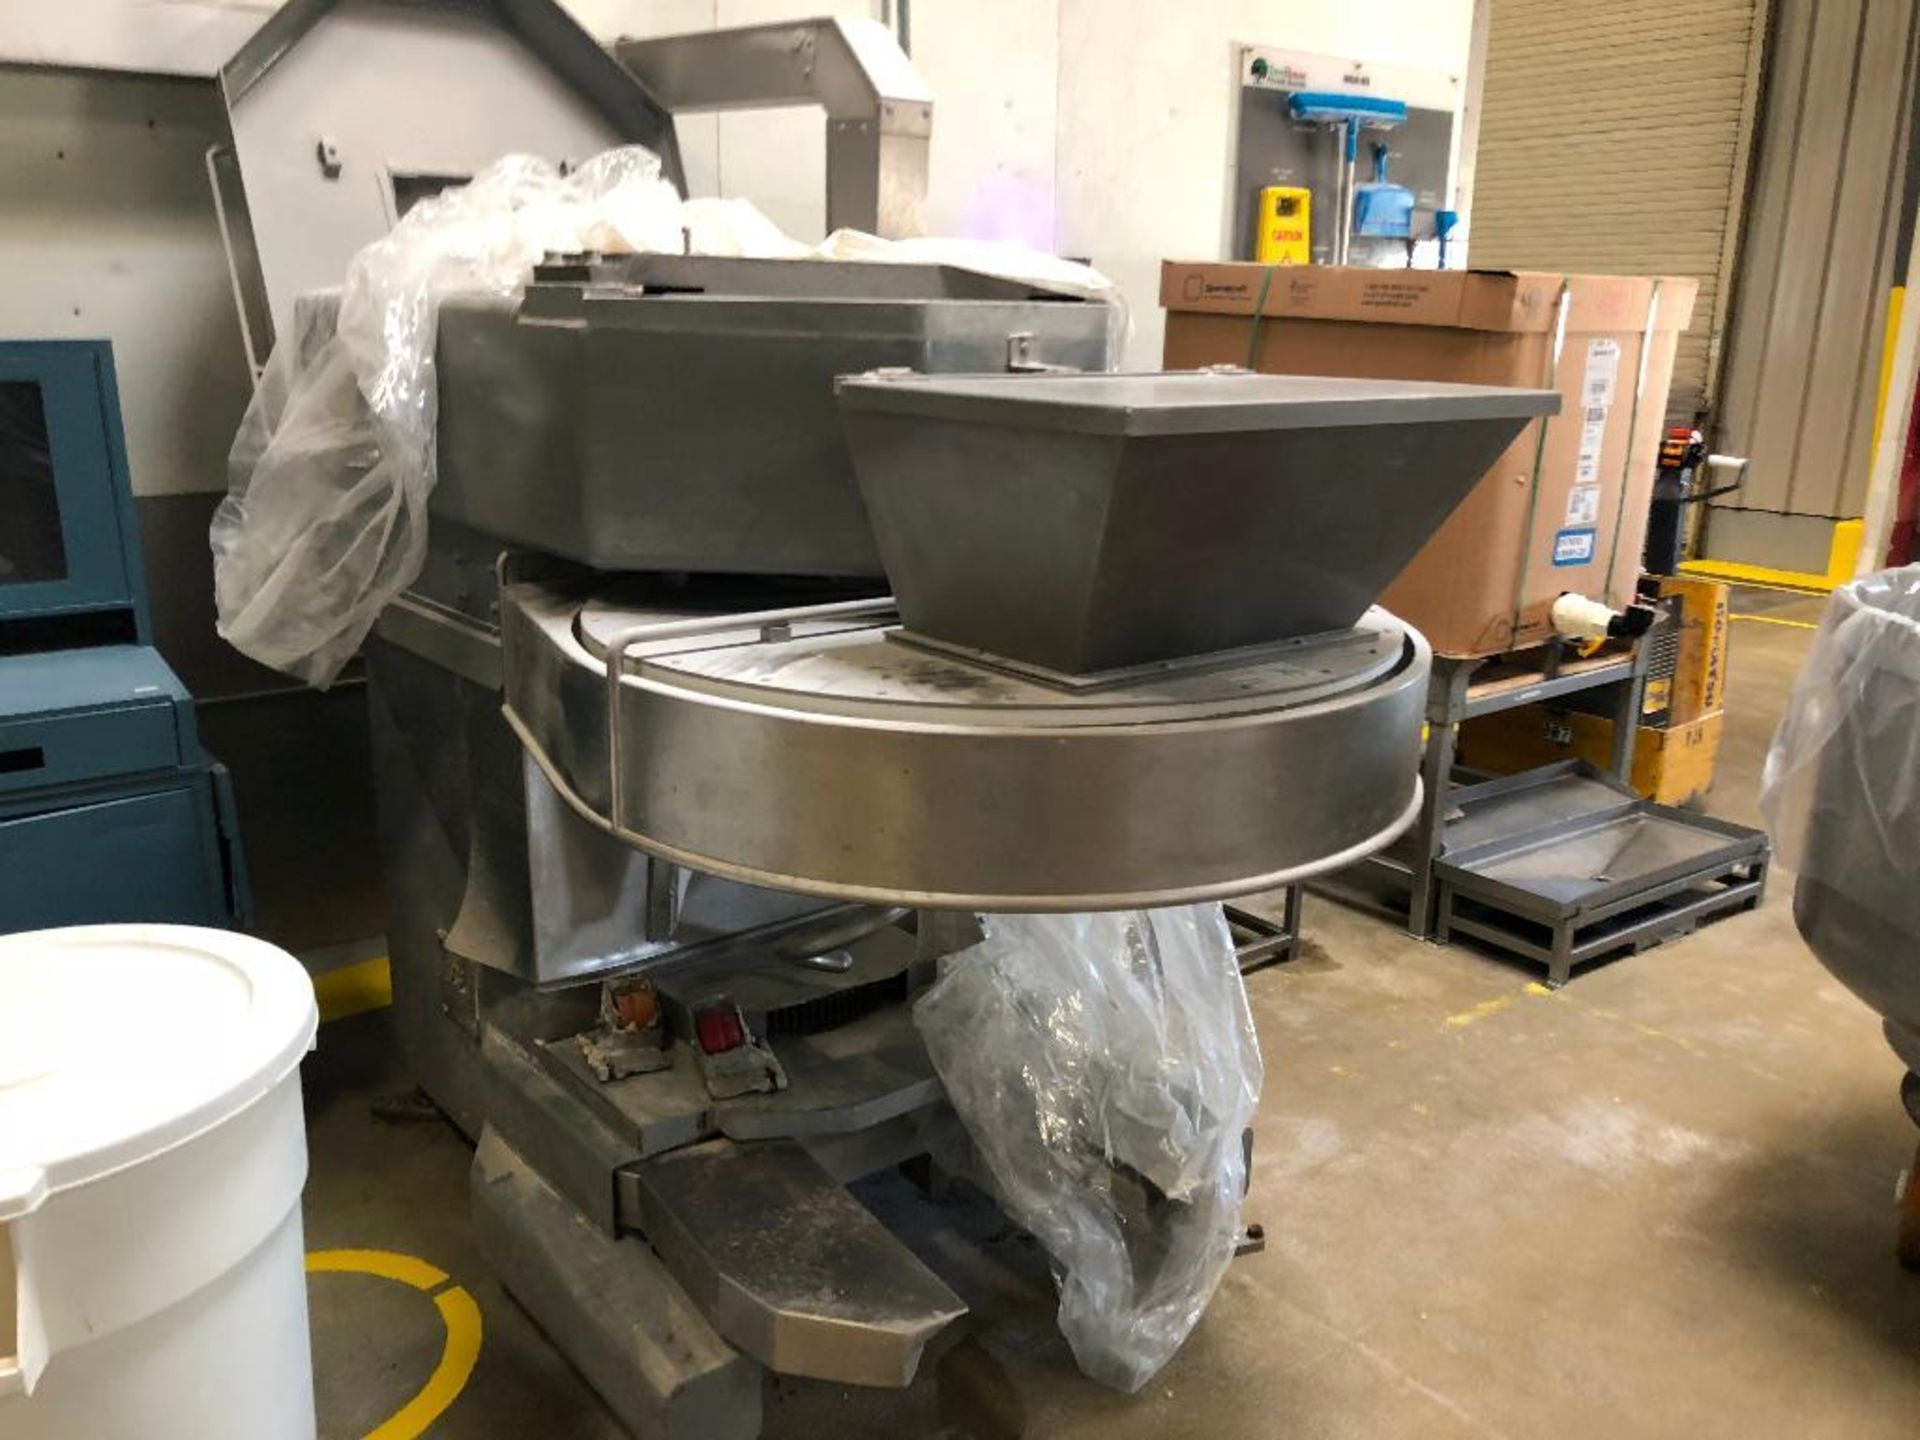 2003 VMI 600 pound spiral dough mixer, model SPI630AVI, s/n 132195, 2-speed with bowl and cart. (MIX